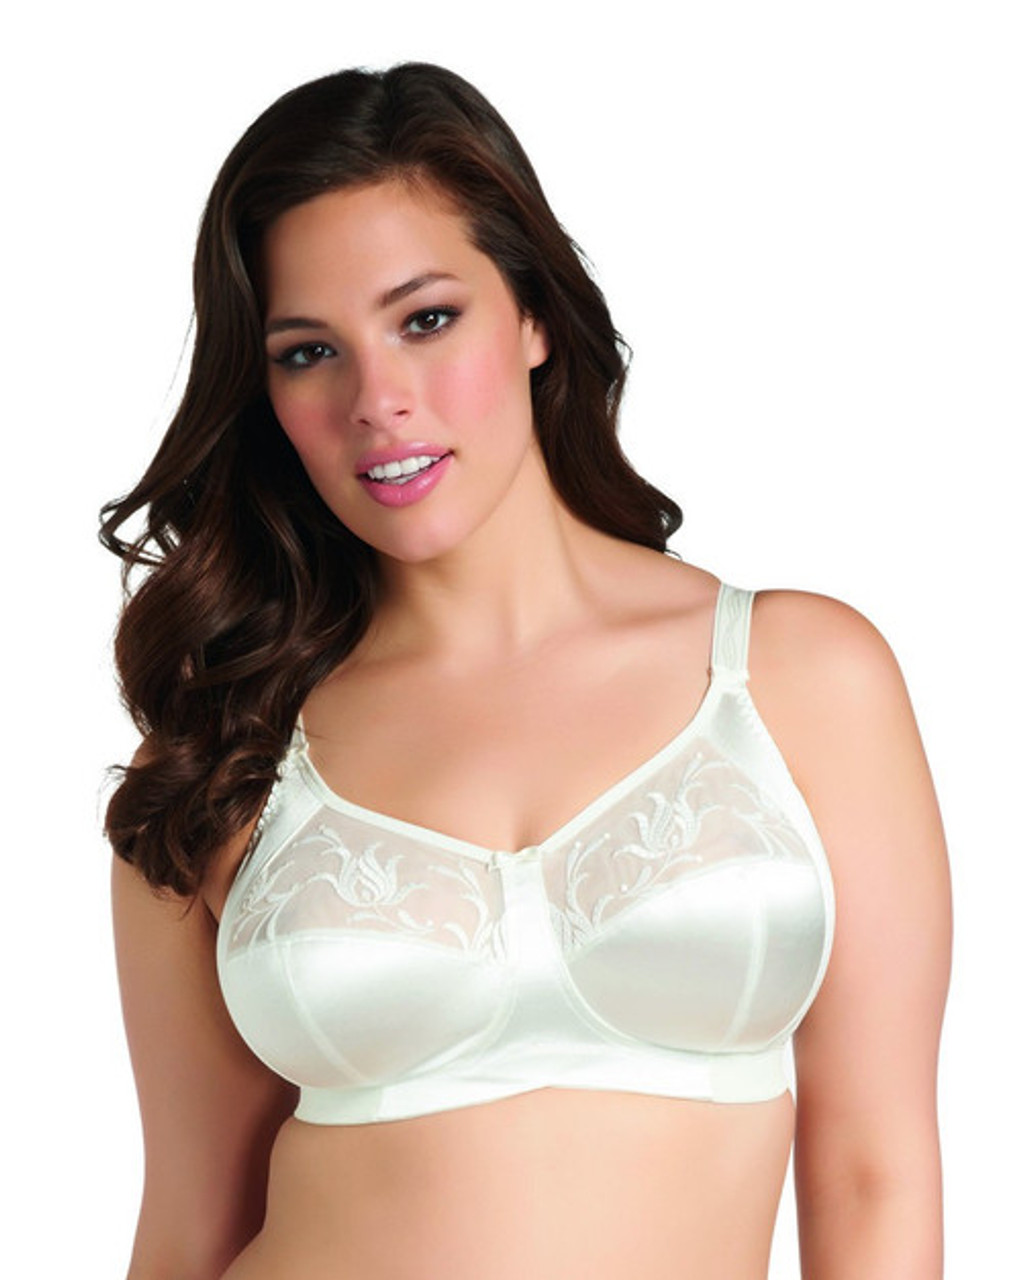 elomi Caitlyn underwire side support bra review – Faustian Foundations